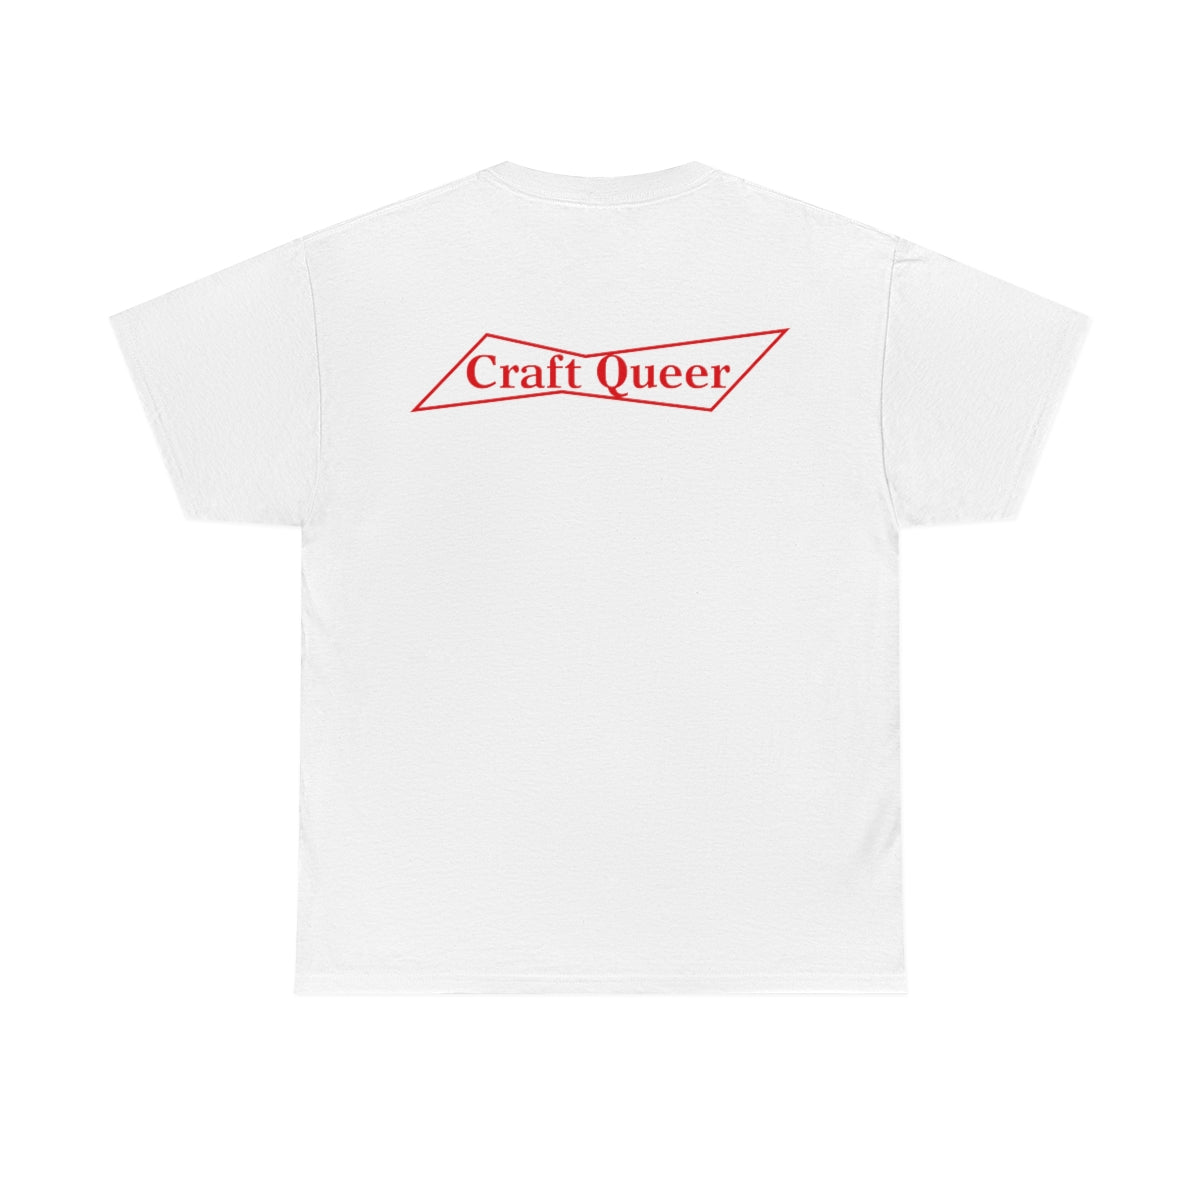 Craft Queer T-shirt